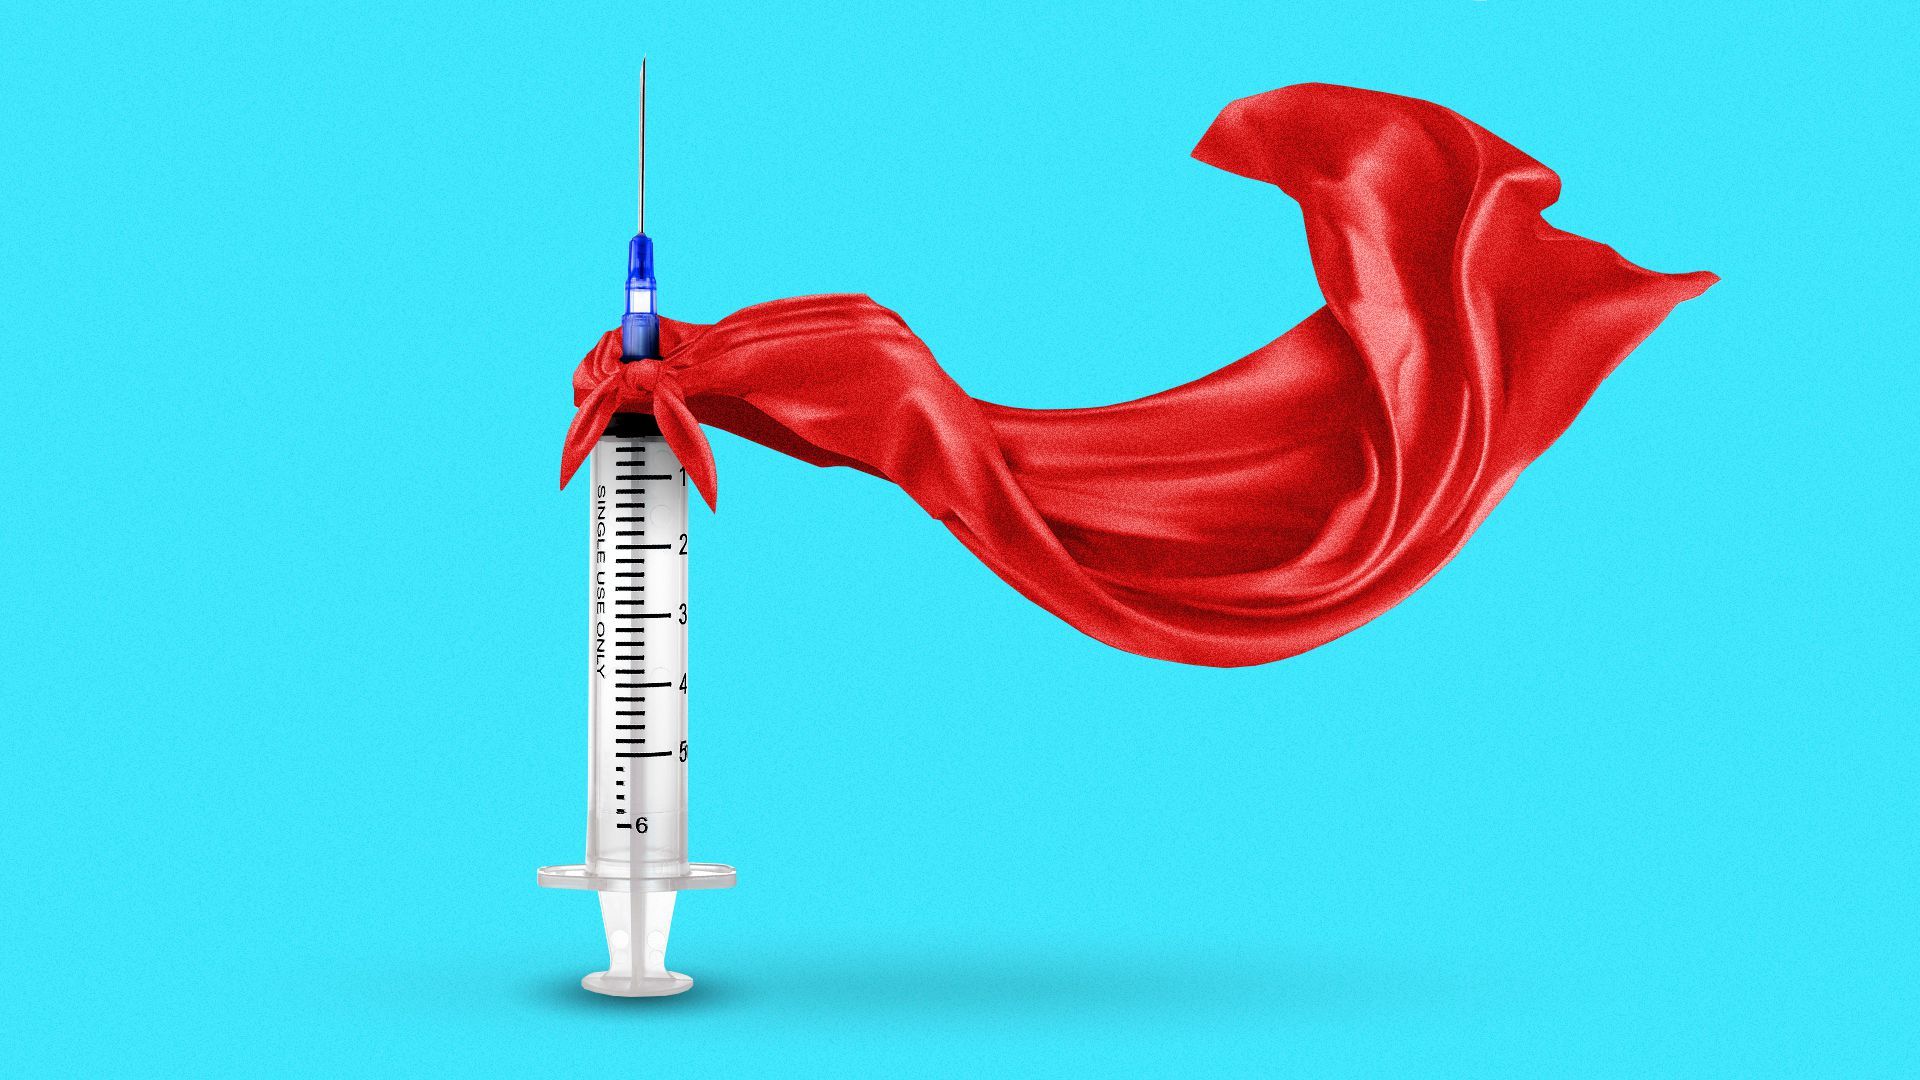 Illustration of an upright vaccine syringe wearing a hero's cape